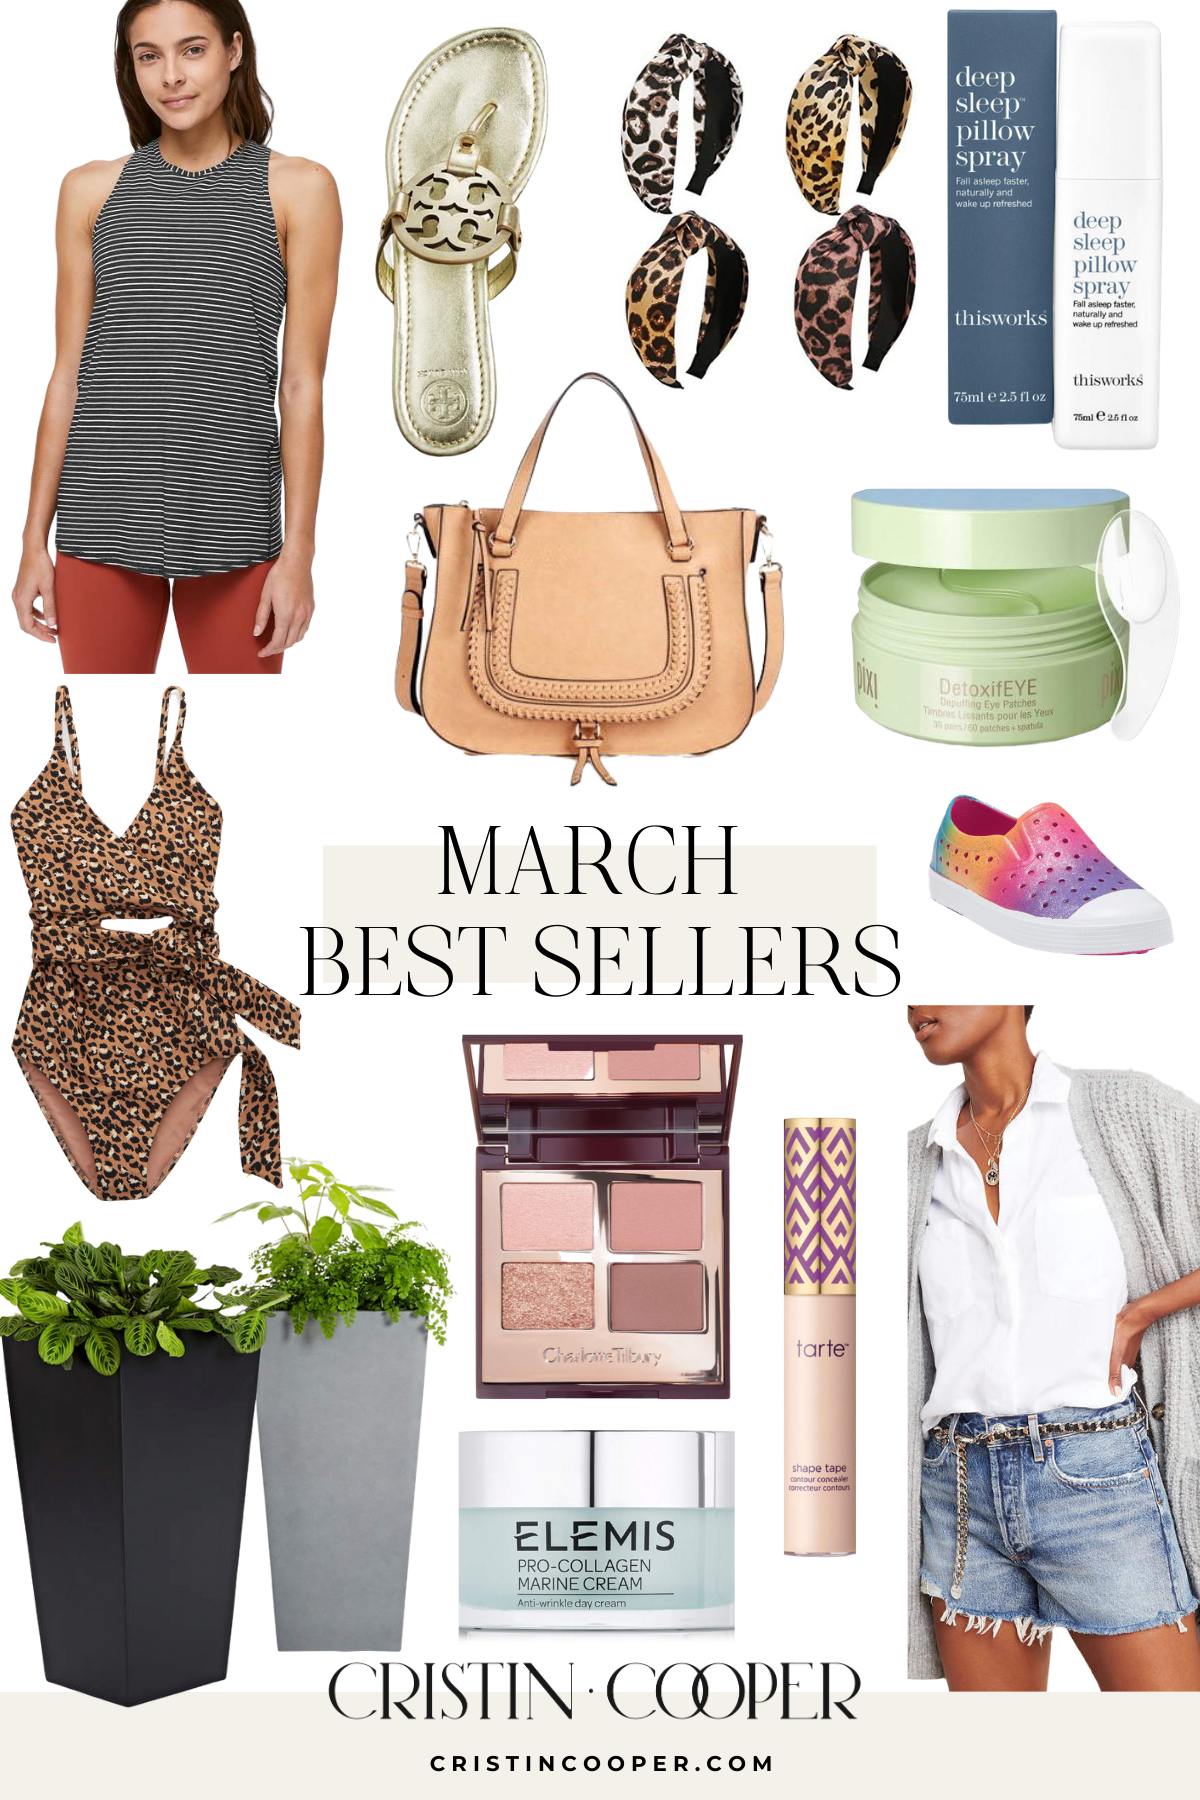 March 2020 Best Sellers, Cristin Cooper